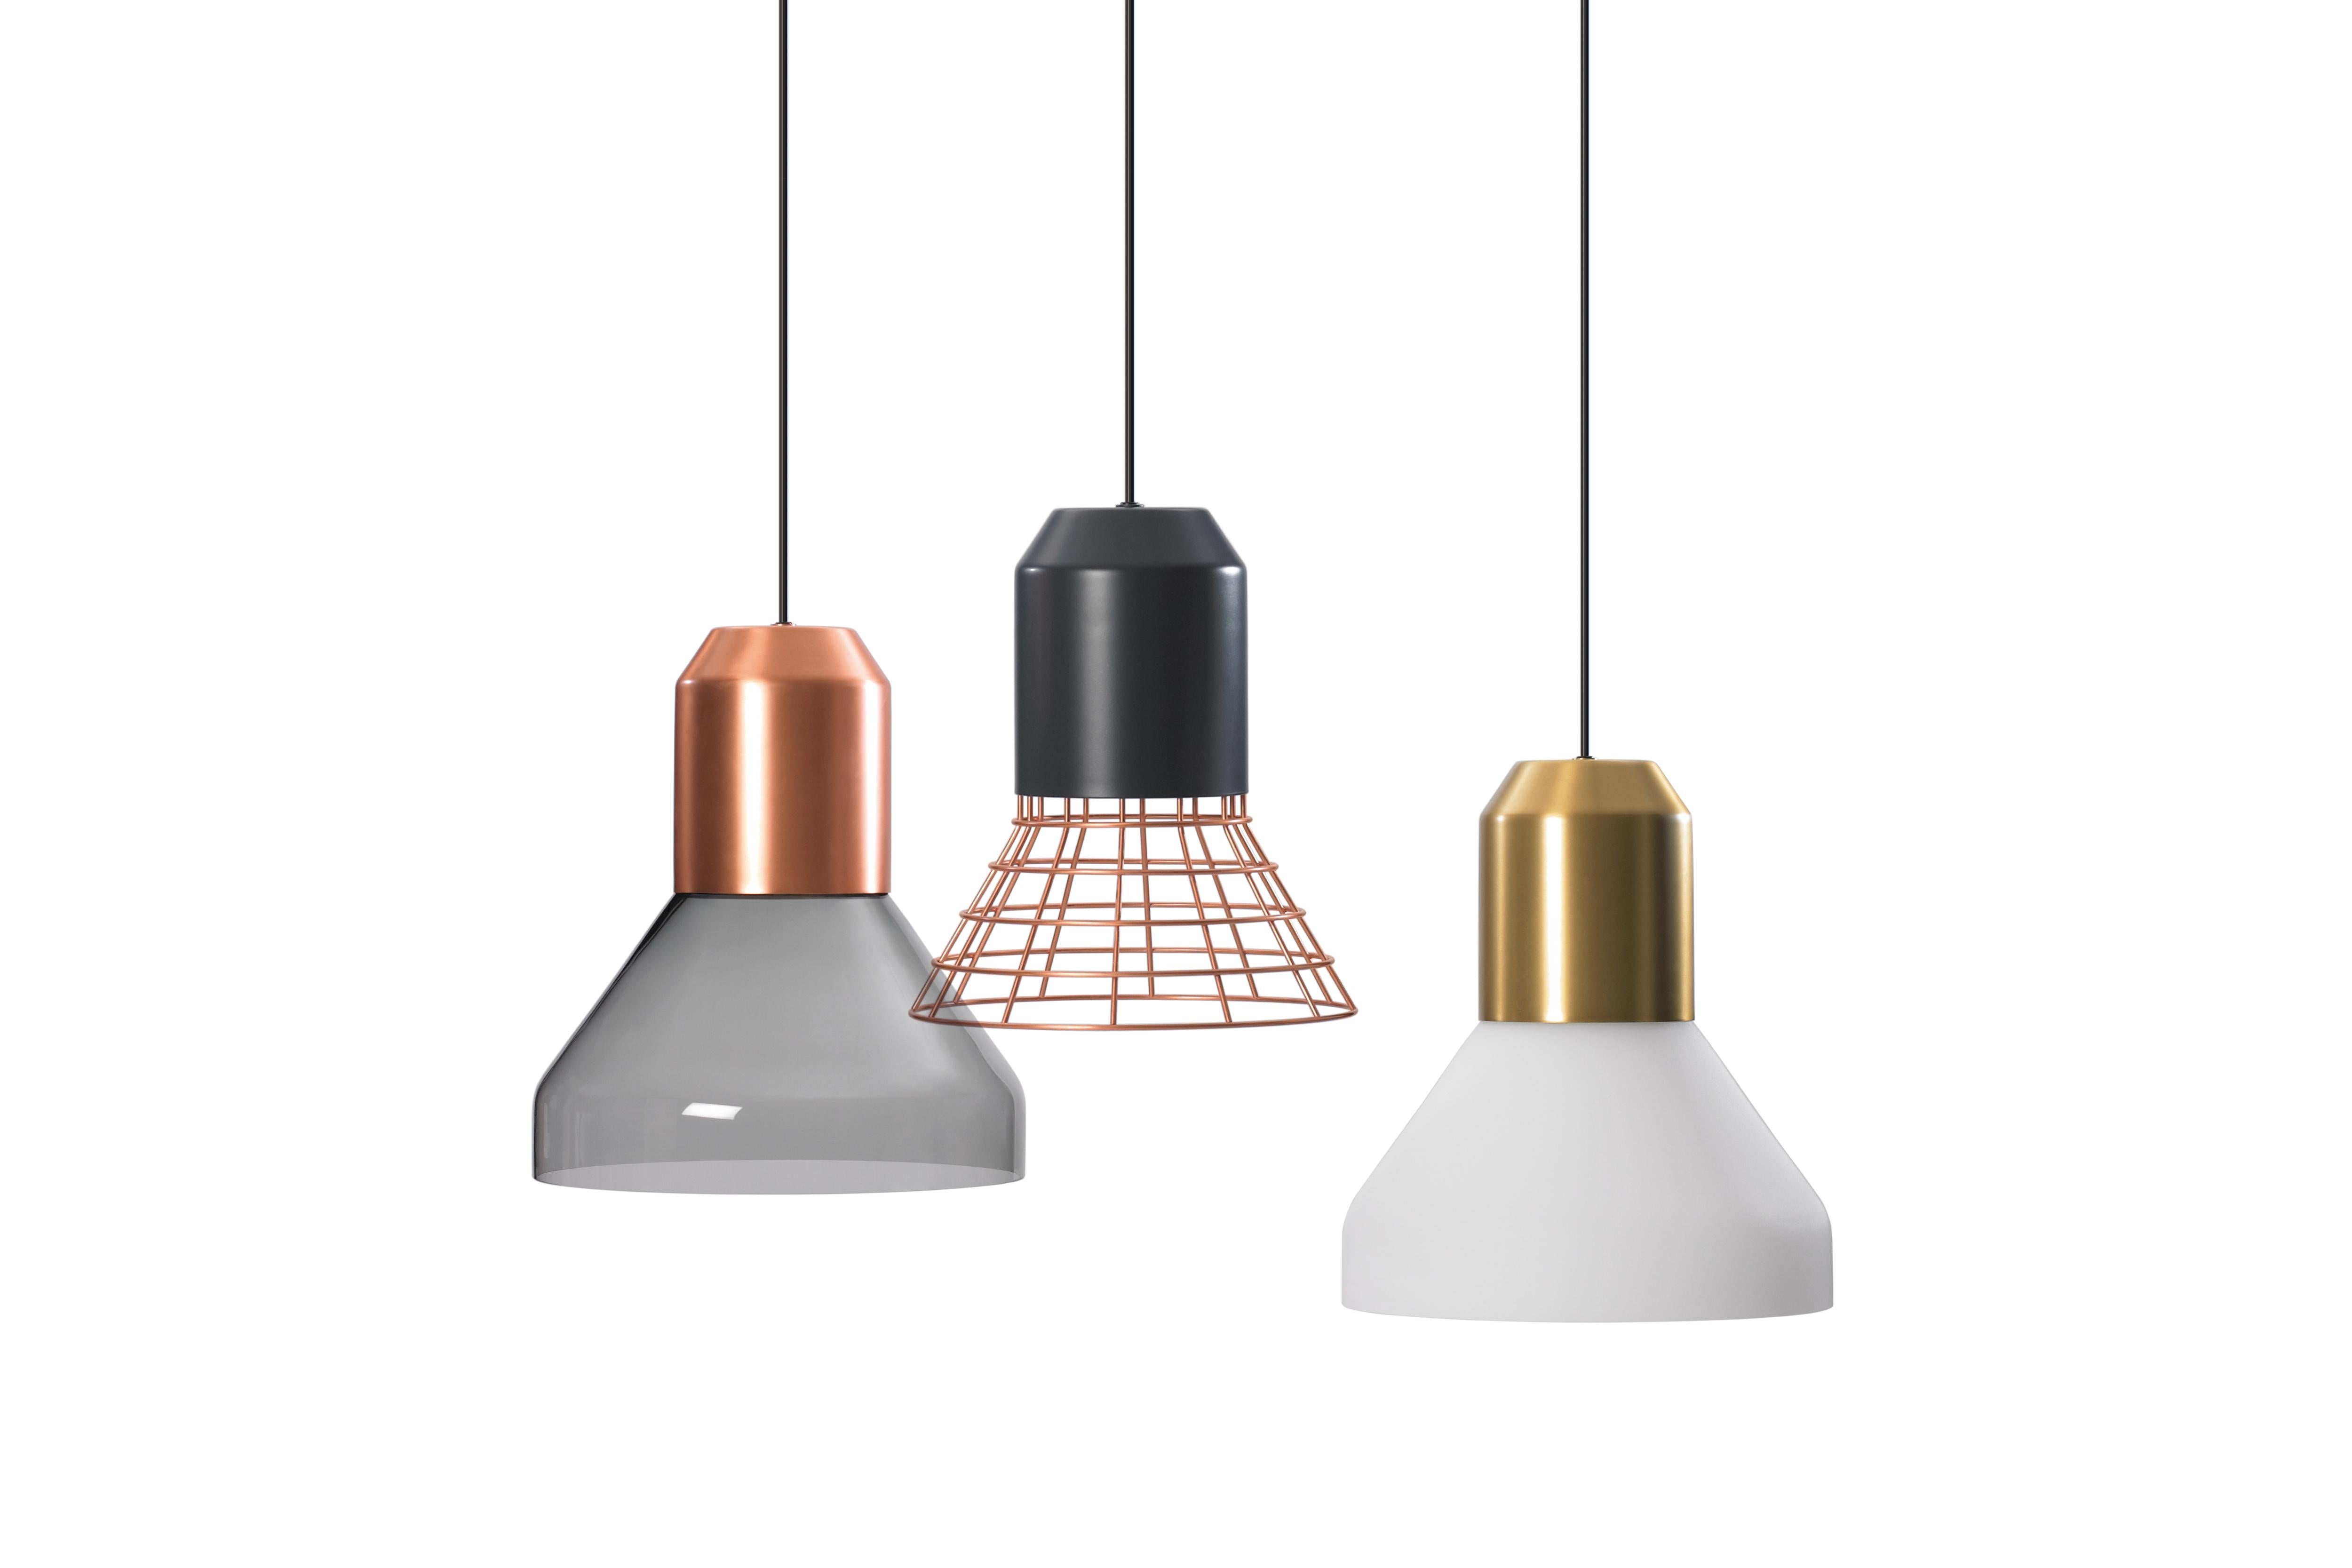 Sebastian Herkner’s Bell Lights reveal their adaptability and flexibility at the very first glance. Each of the lampshades in this family of pendant lamps can be combined with a choice of sleek cylindrical bulb sockets in grey, brass or copper and